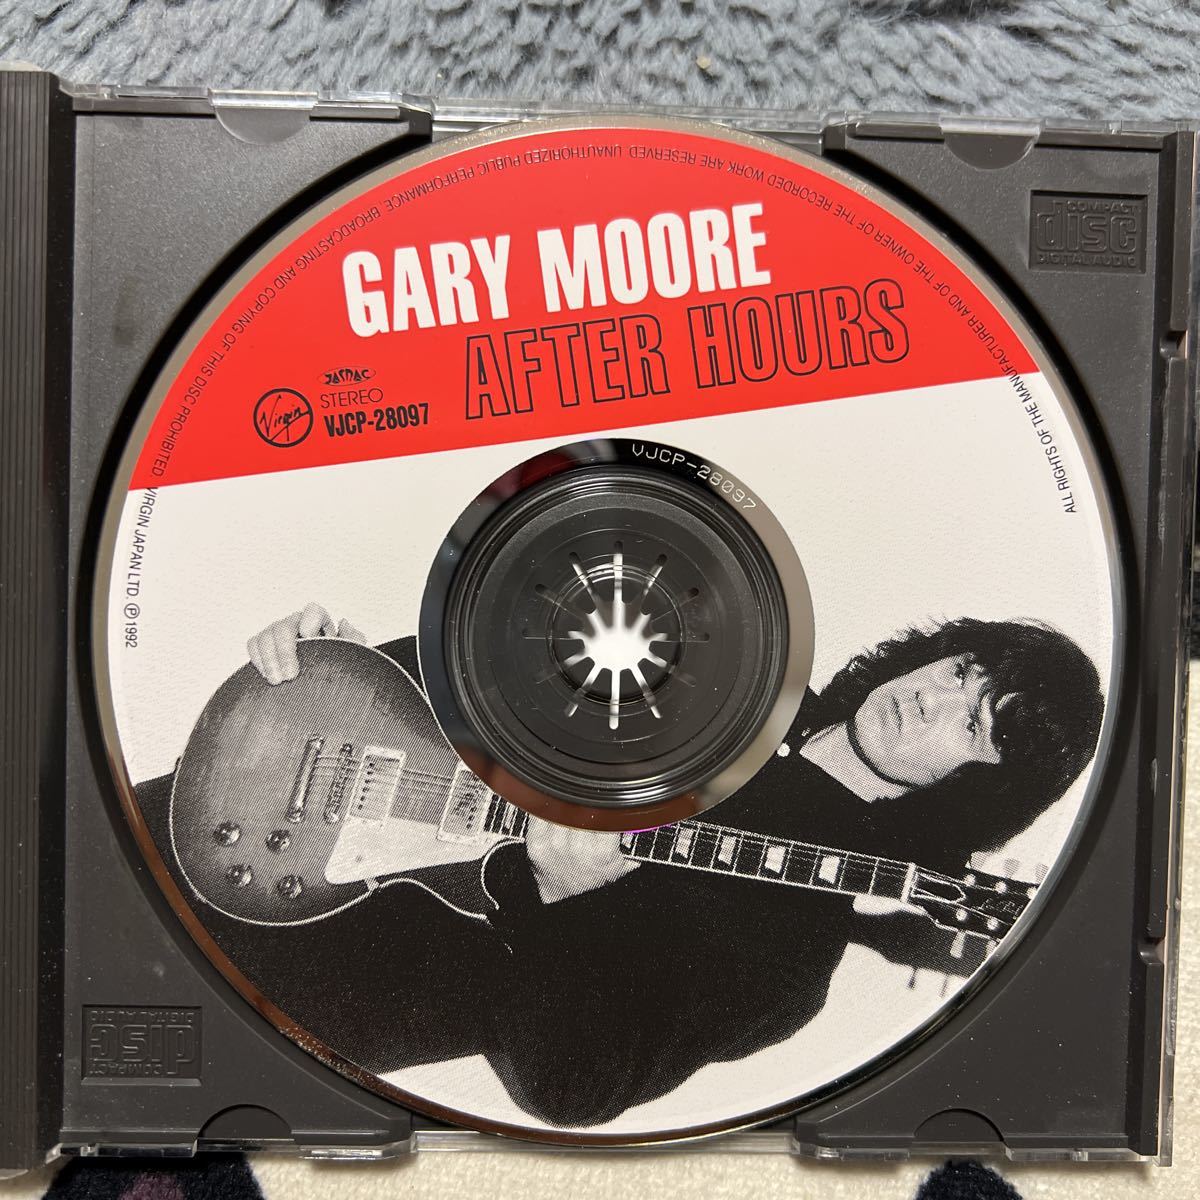 CD ゲイリー・ムーア GARY MOORE / After HOURS VJCP-28097